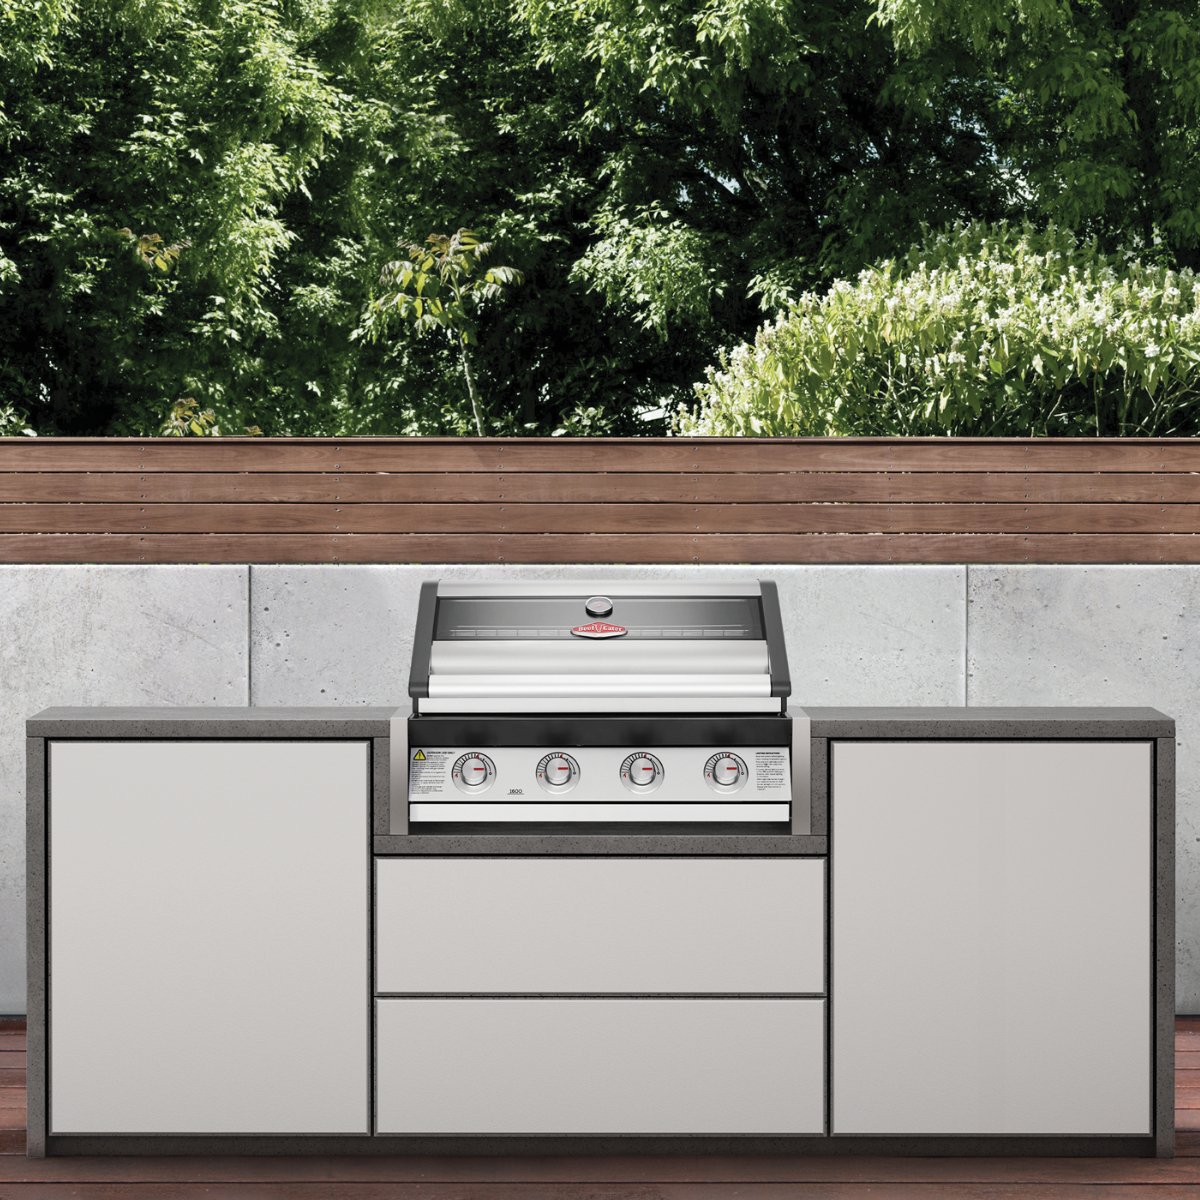 Beefeater 1600S 4 Burner Built-In Grill - Kitchen In The Garden